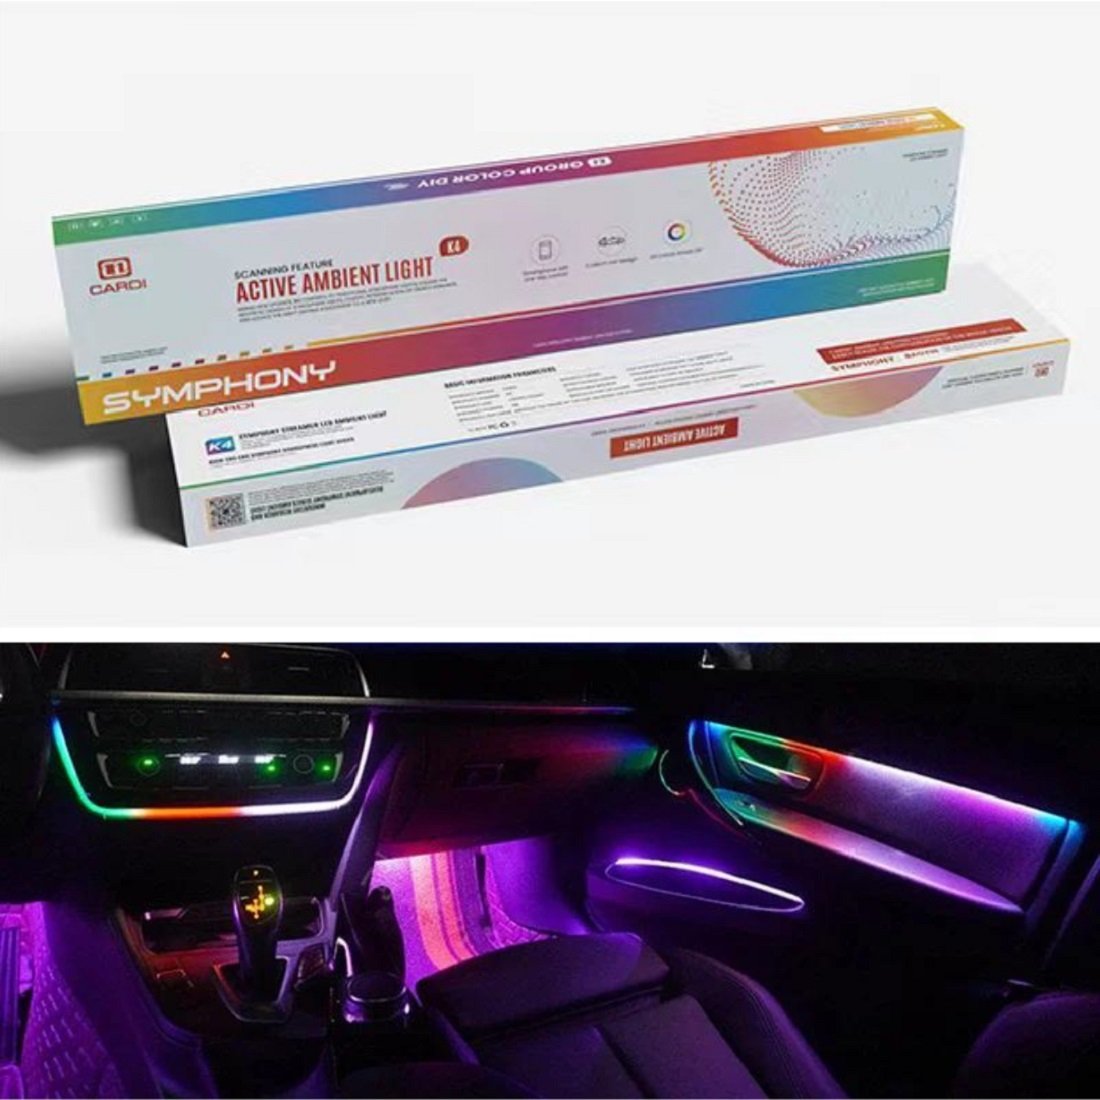 Cardi K4 Active Symphony 6th Generation 22 in 1 wireless LED Atmosphere Lights for Automotive Car Interior Ambient acrylic strips lighting